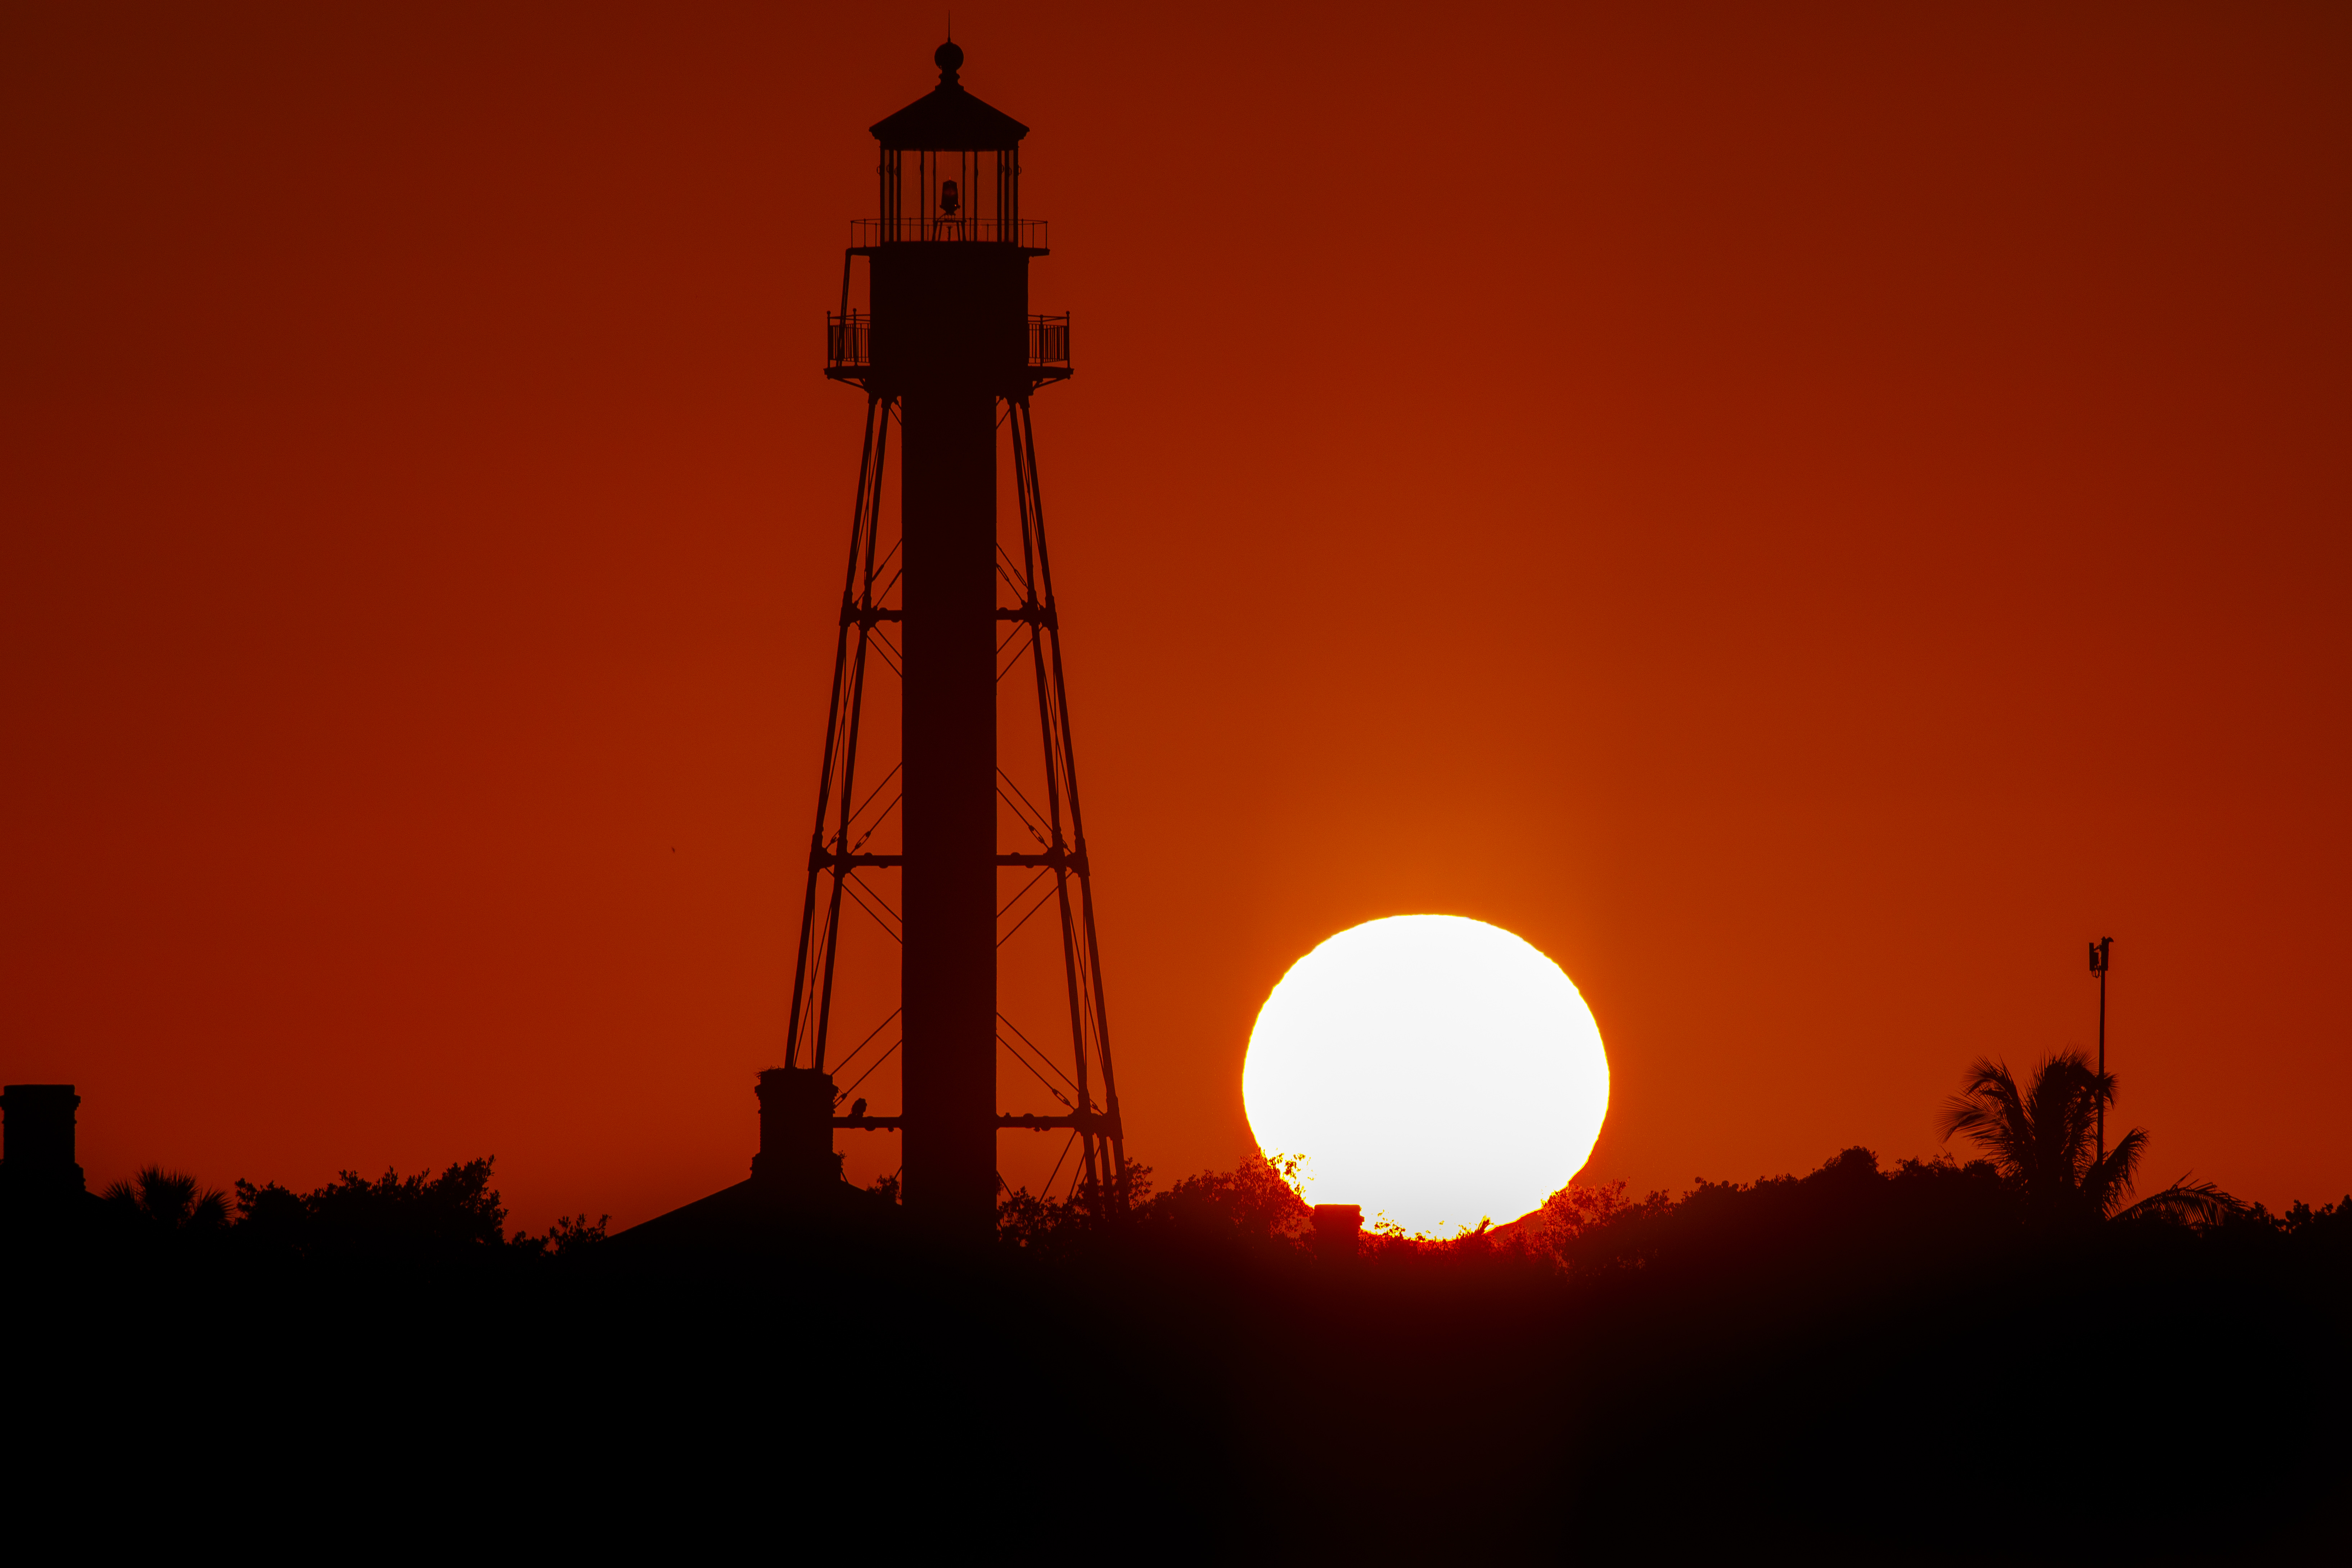 Sunset with Sanibel Lighthouse silhouette